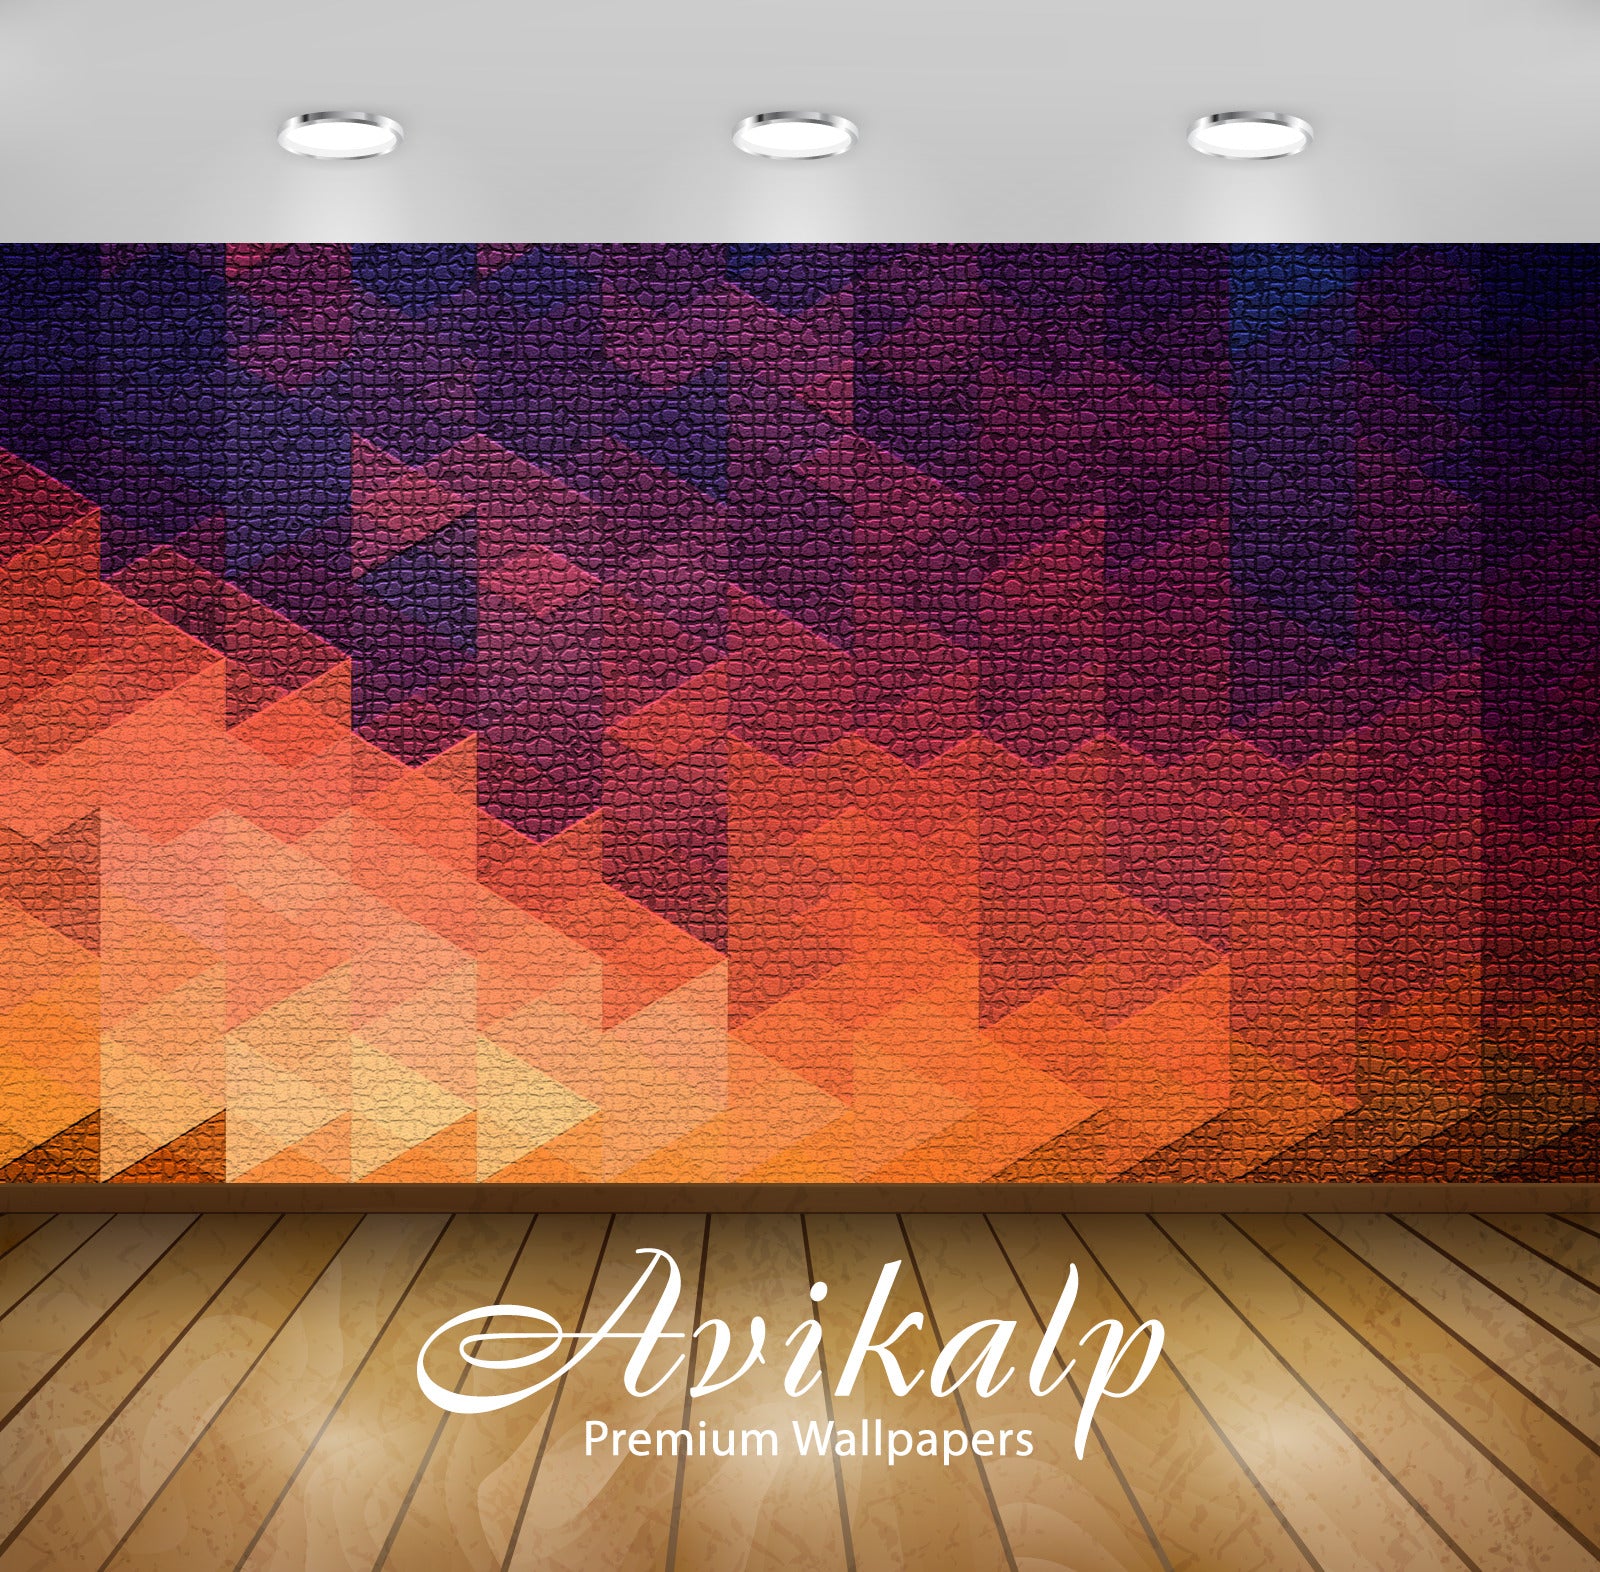 Avikalp Exclusive Awi4518 Mosaic Full HD Wallpapers for Living room, Hall, Kids Room, Kitchen, TV Ba